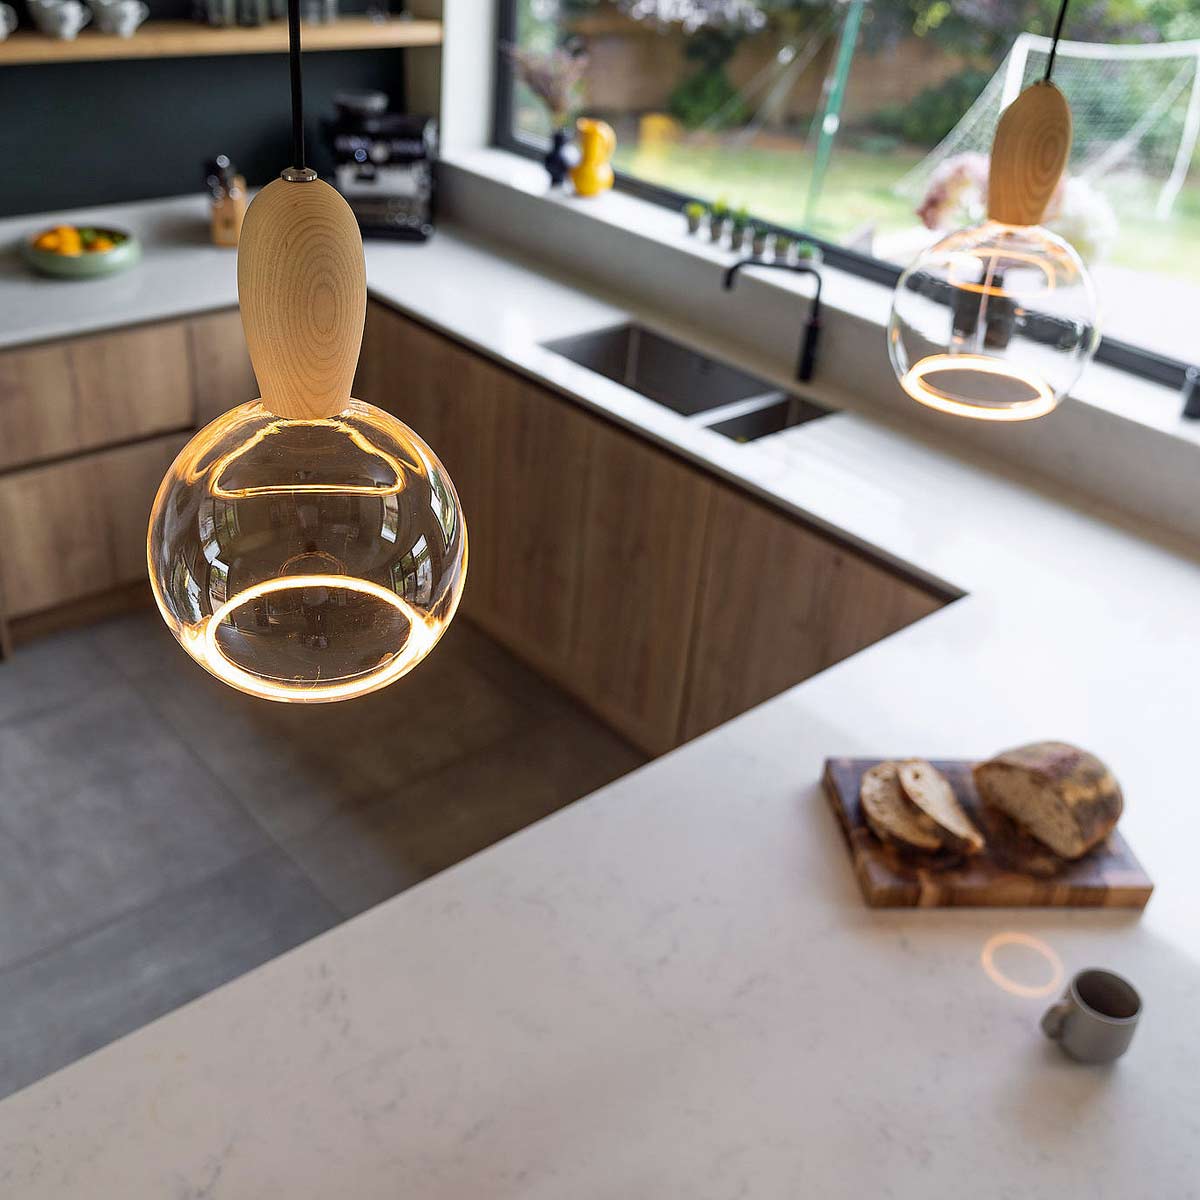  The Woody wooden pendant light can be used on its own or as part of a series of lights for use above a kitchen island.